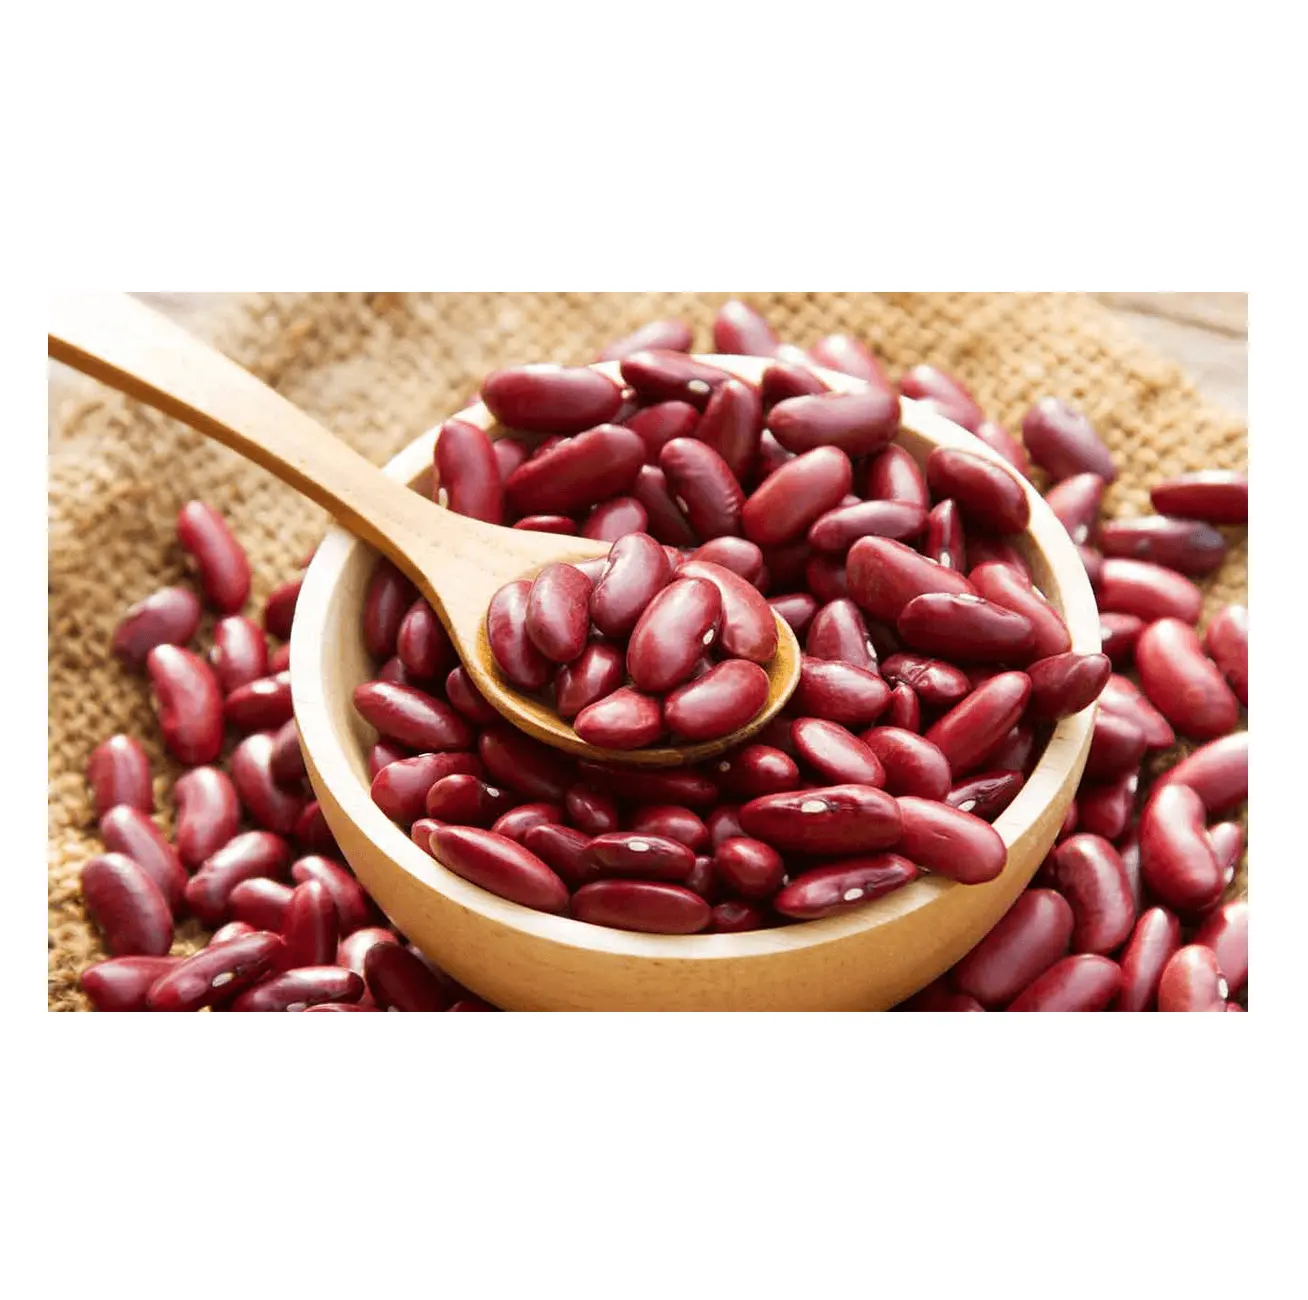 Best Quality Low Price Bulk Stock Available Of Dark Red Kidney Beans Long Shape Kidney Beans For Export World Wide From Germany